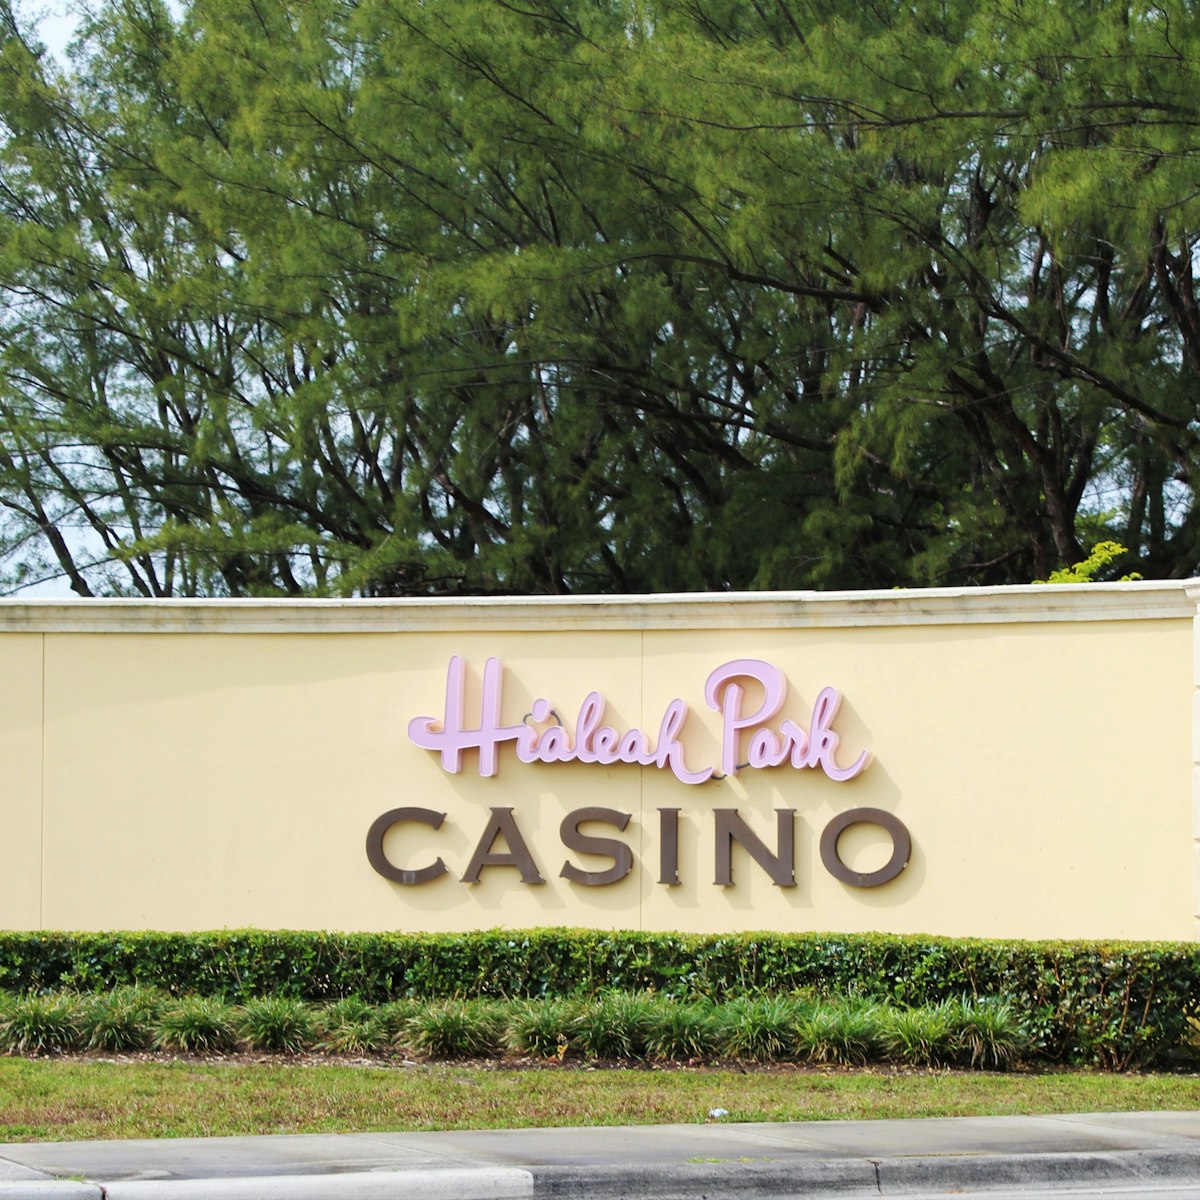 Hialeah, Fl, USA: April 2021: Outdoor sign for Hialeah Park Casino. ; Shutterstock ID 1958803822; your: Bridget Brown; gl: 65050; netsuite: Online Editorial; full: POI Image Update